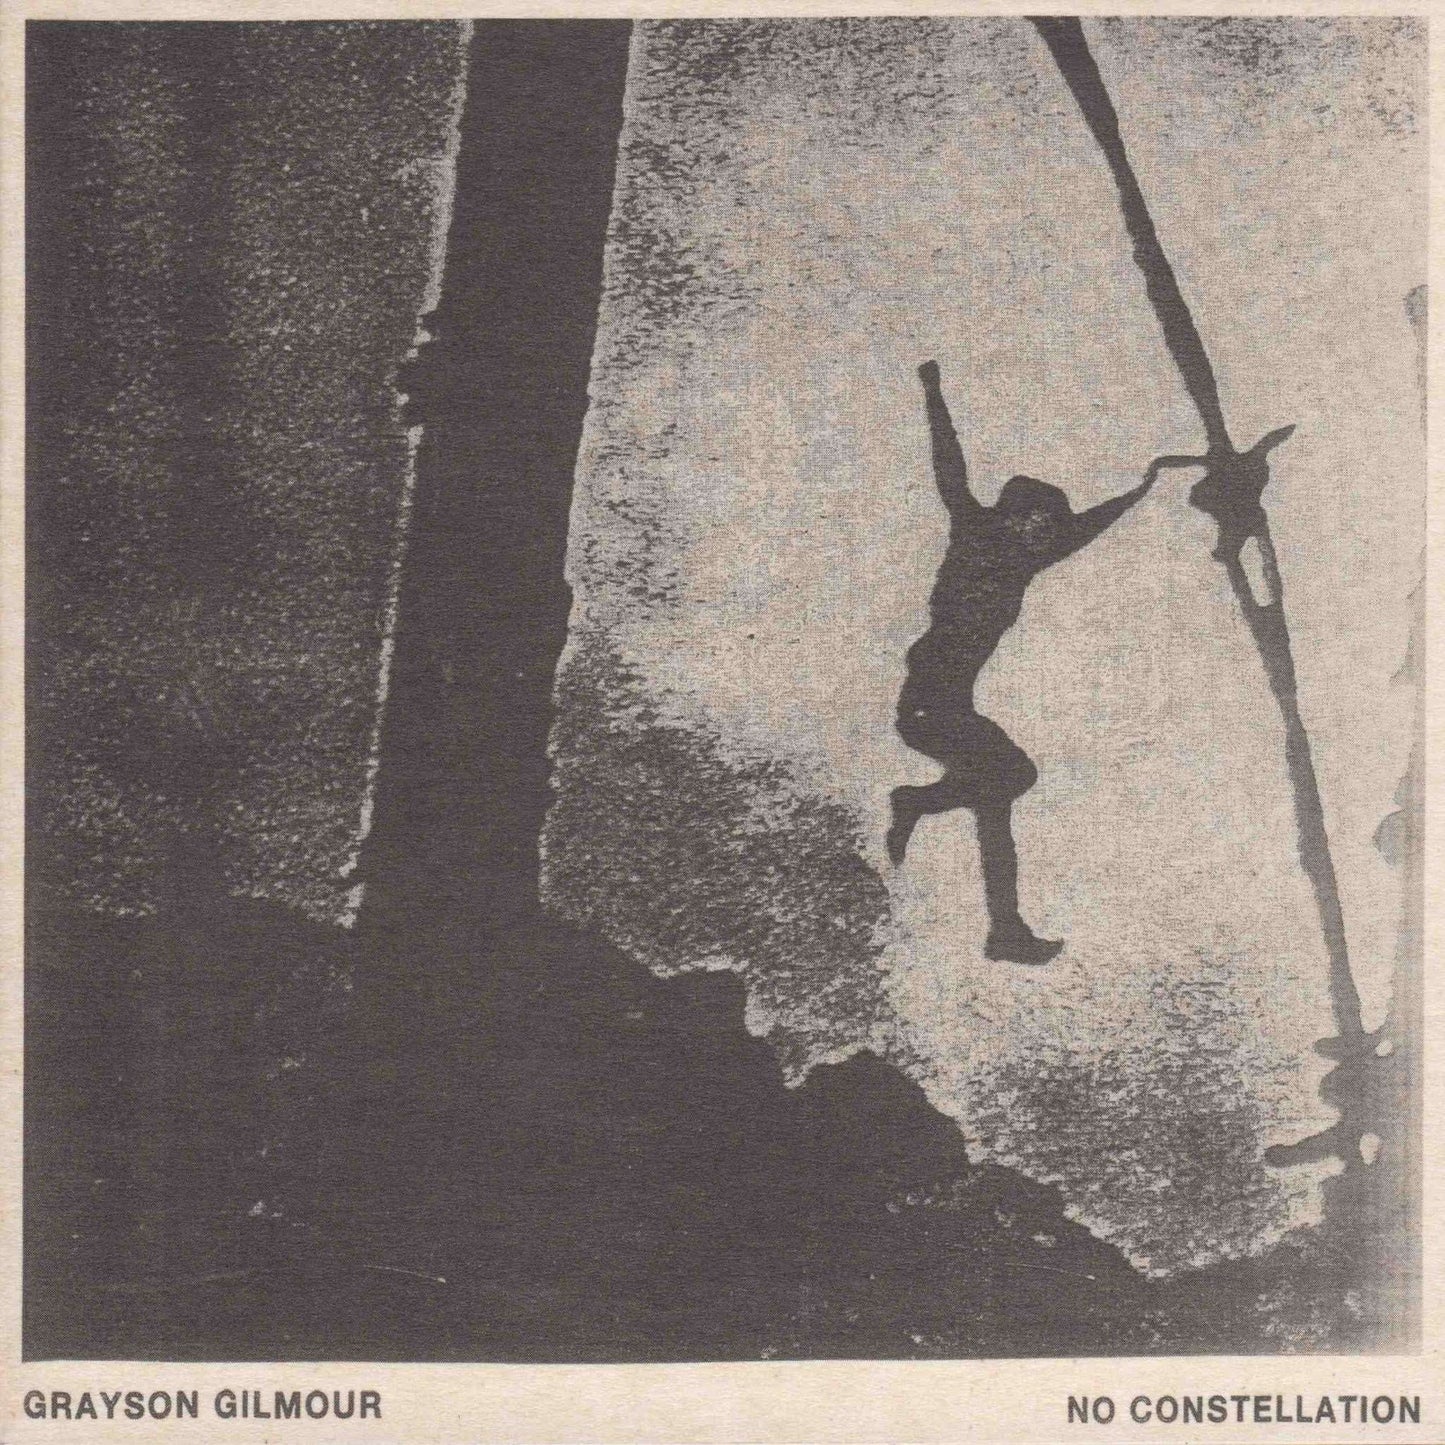 Grayson Gilmour - No Constellation | Buy on CD